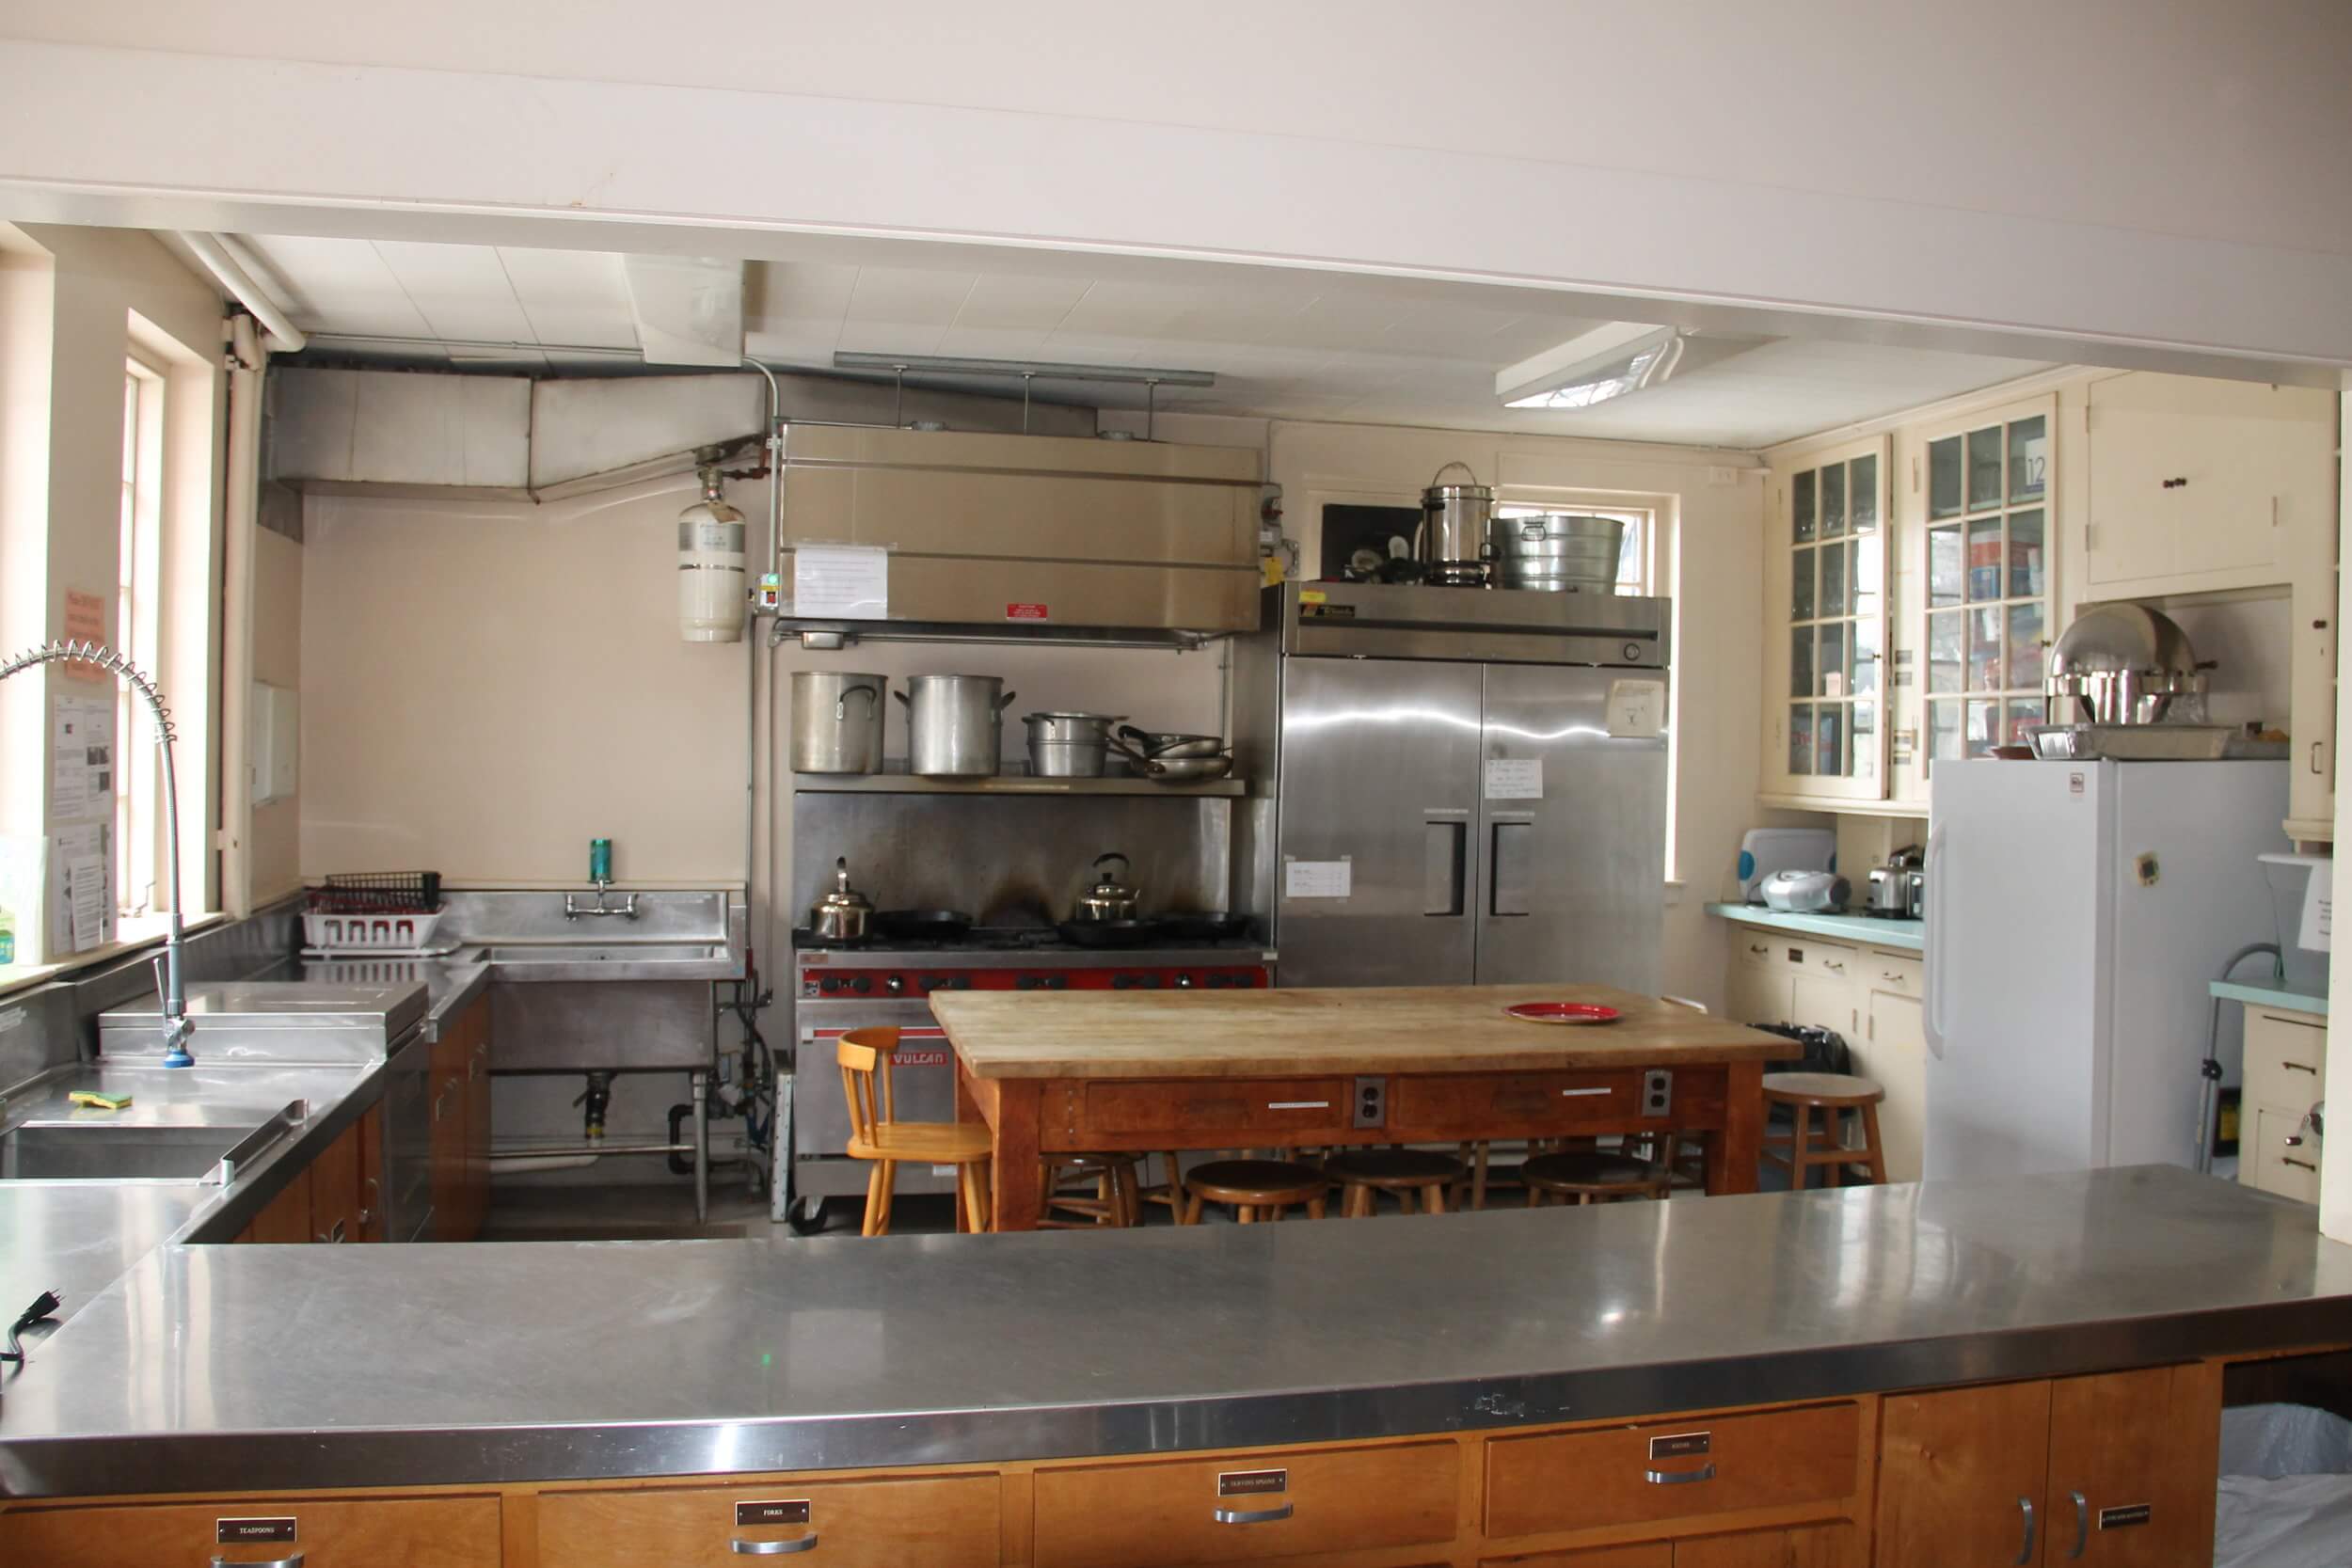  kitchen $100/4 hours, $200/8 hours FOR NON-MEMBERS $50/ 4 hours, $100/ 8 hours FOR MEMBERS 